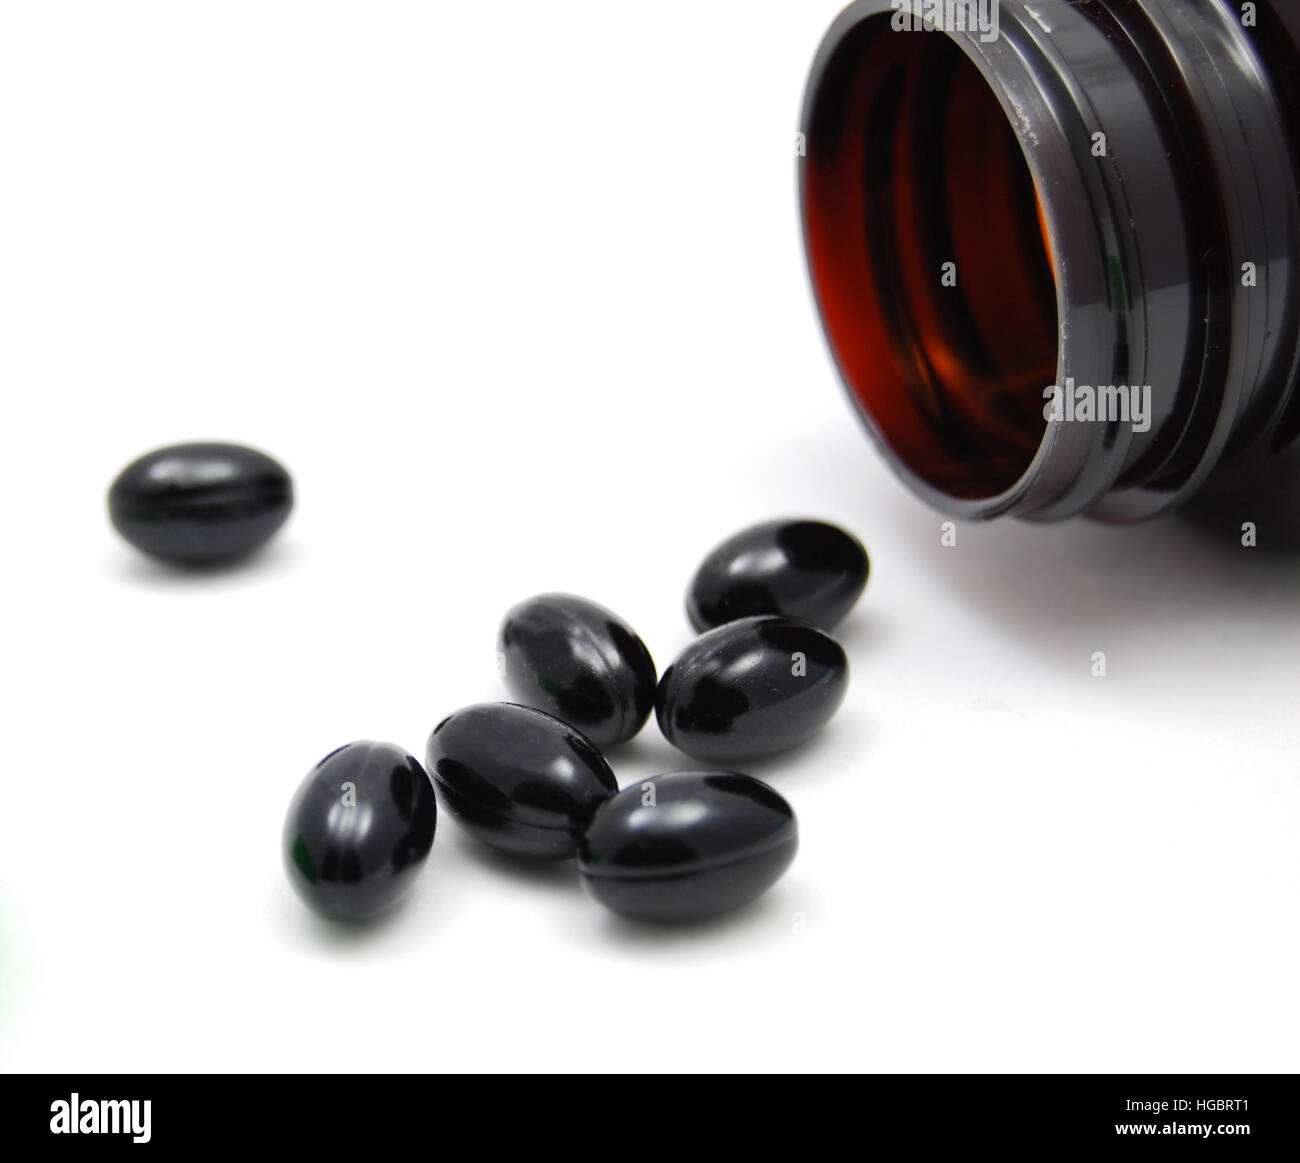 Sleeping pills or liquid herbs in a soft gel capsule spilling from a bottle. Stock Photo